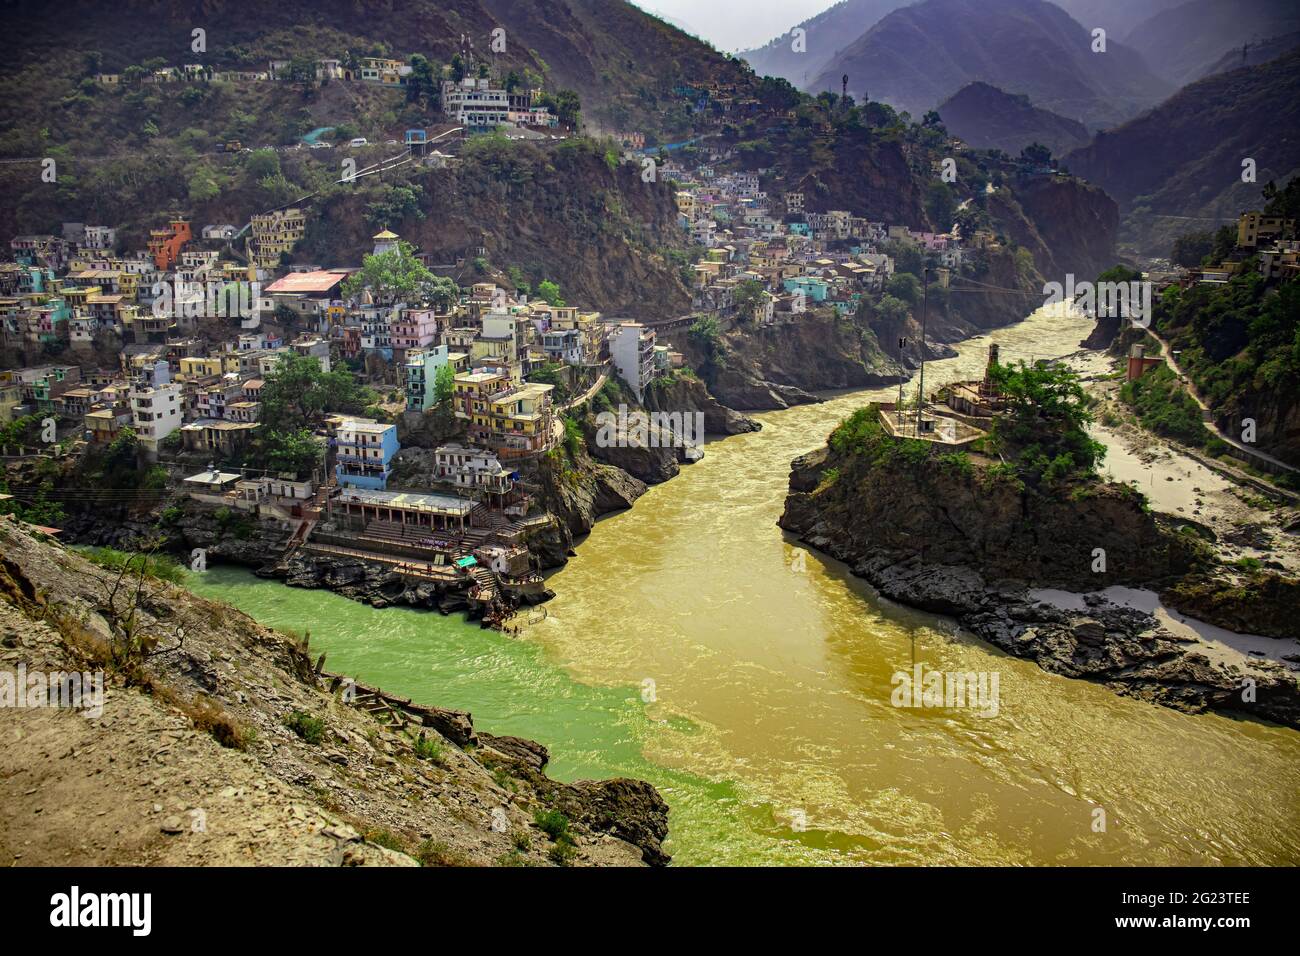 June 16 2019 Devparyag, Uttrakhand, India. Devprayag is one of the Panch Prayag, It is the point of confluence of rivers Alaknanda which originated fr Stock Photo